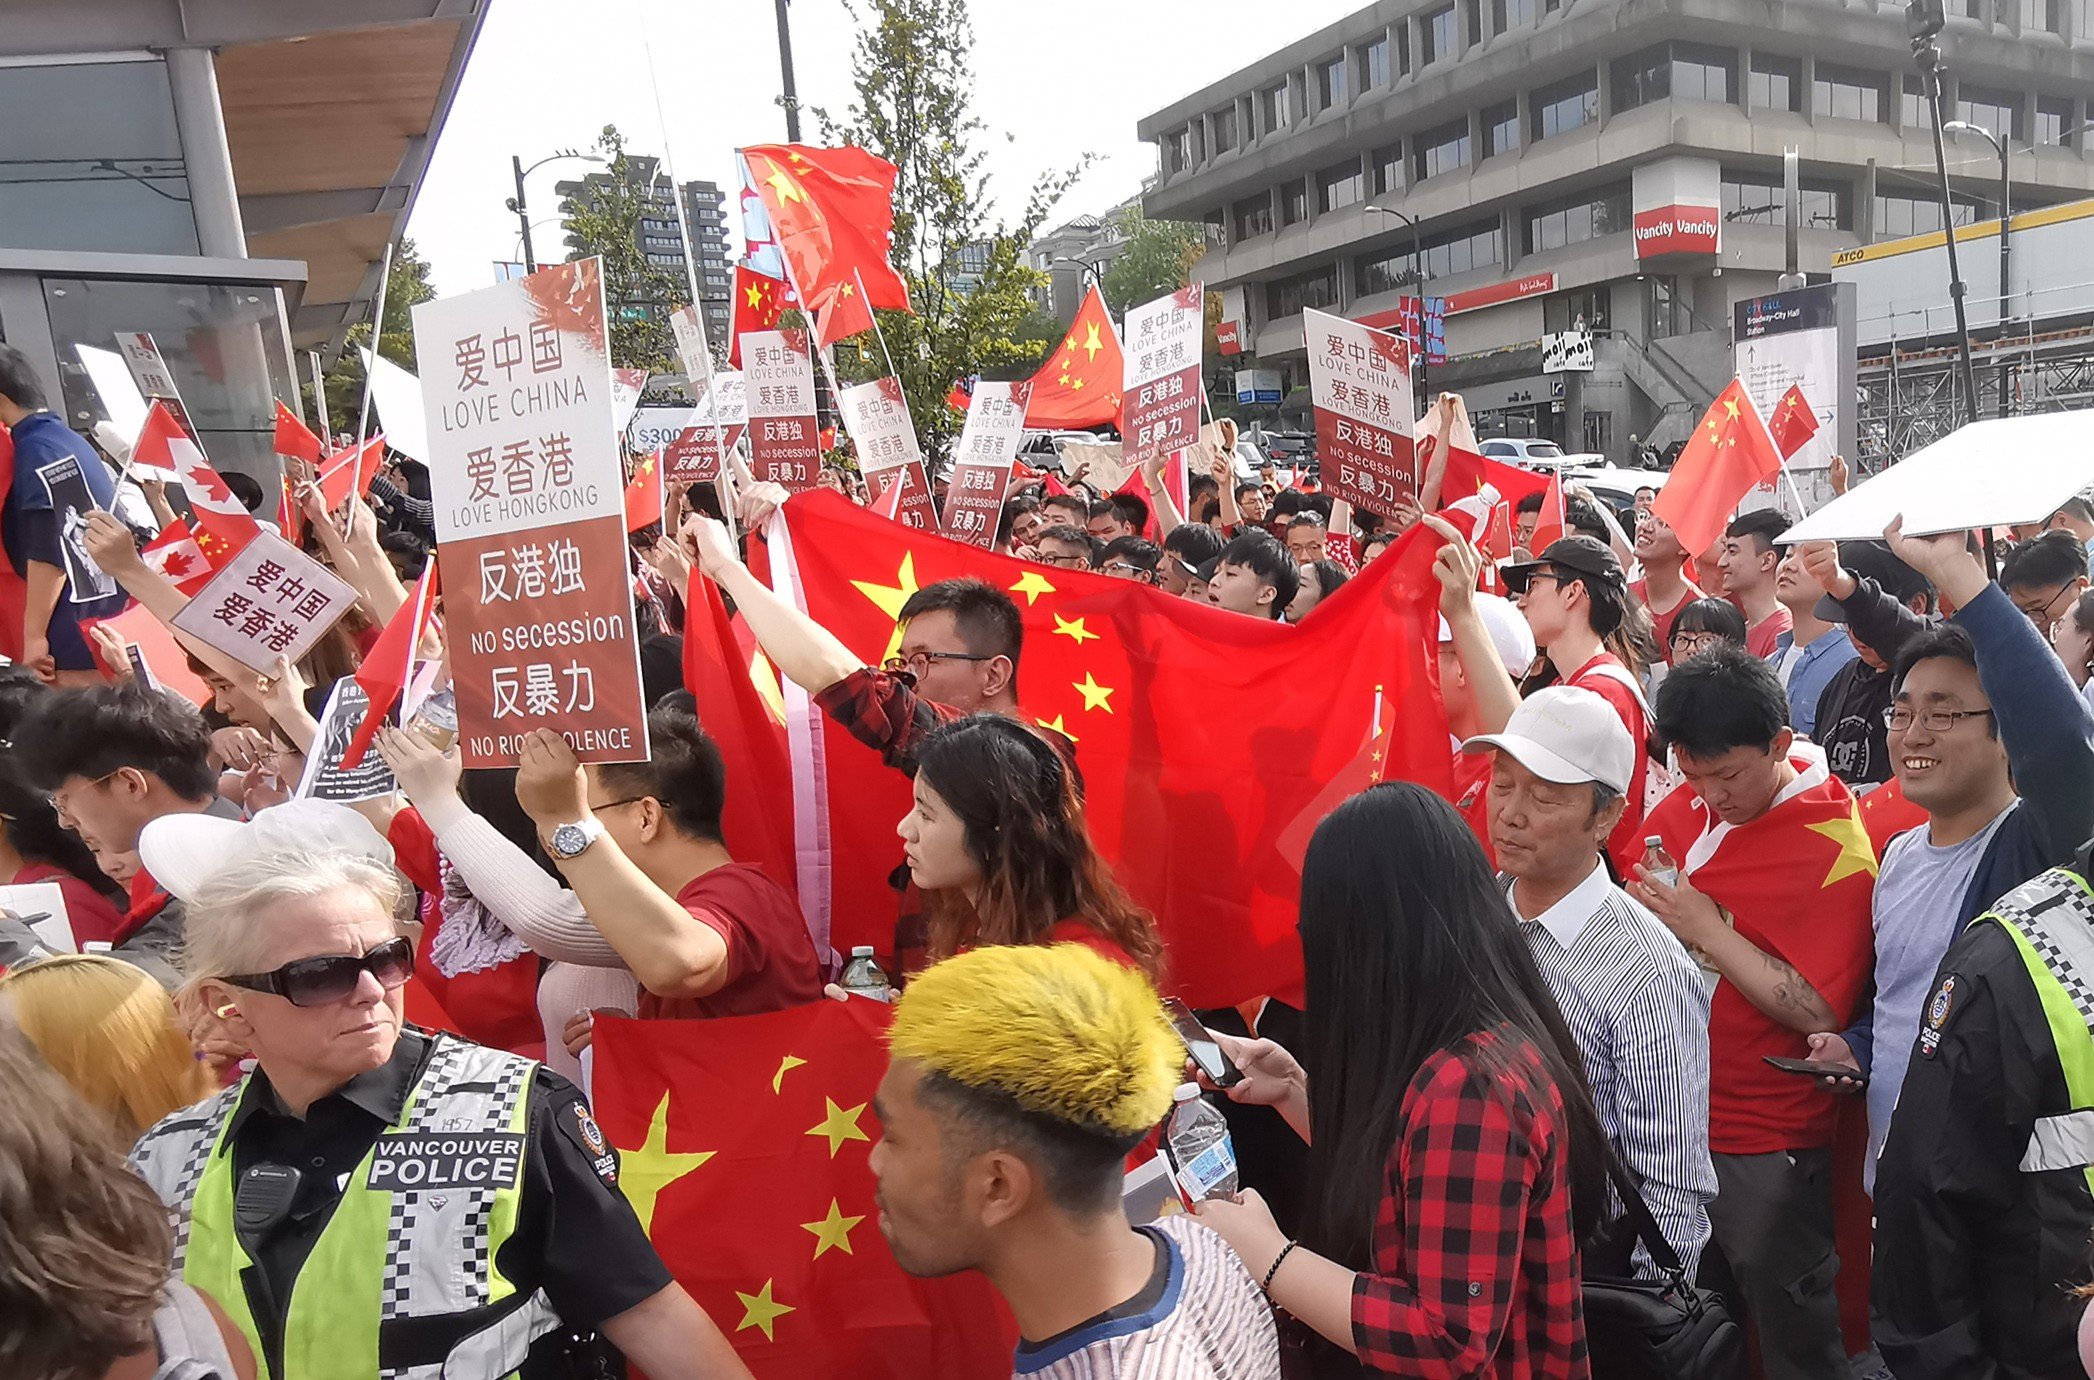 Supporters of China in Vancouver take part in a rally calling for an end to the violence in Hong Kong on August 17. Photo: Xinhua